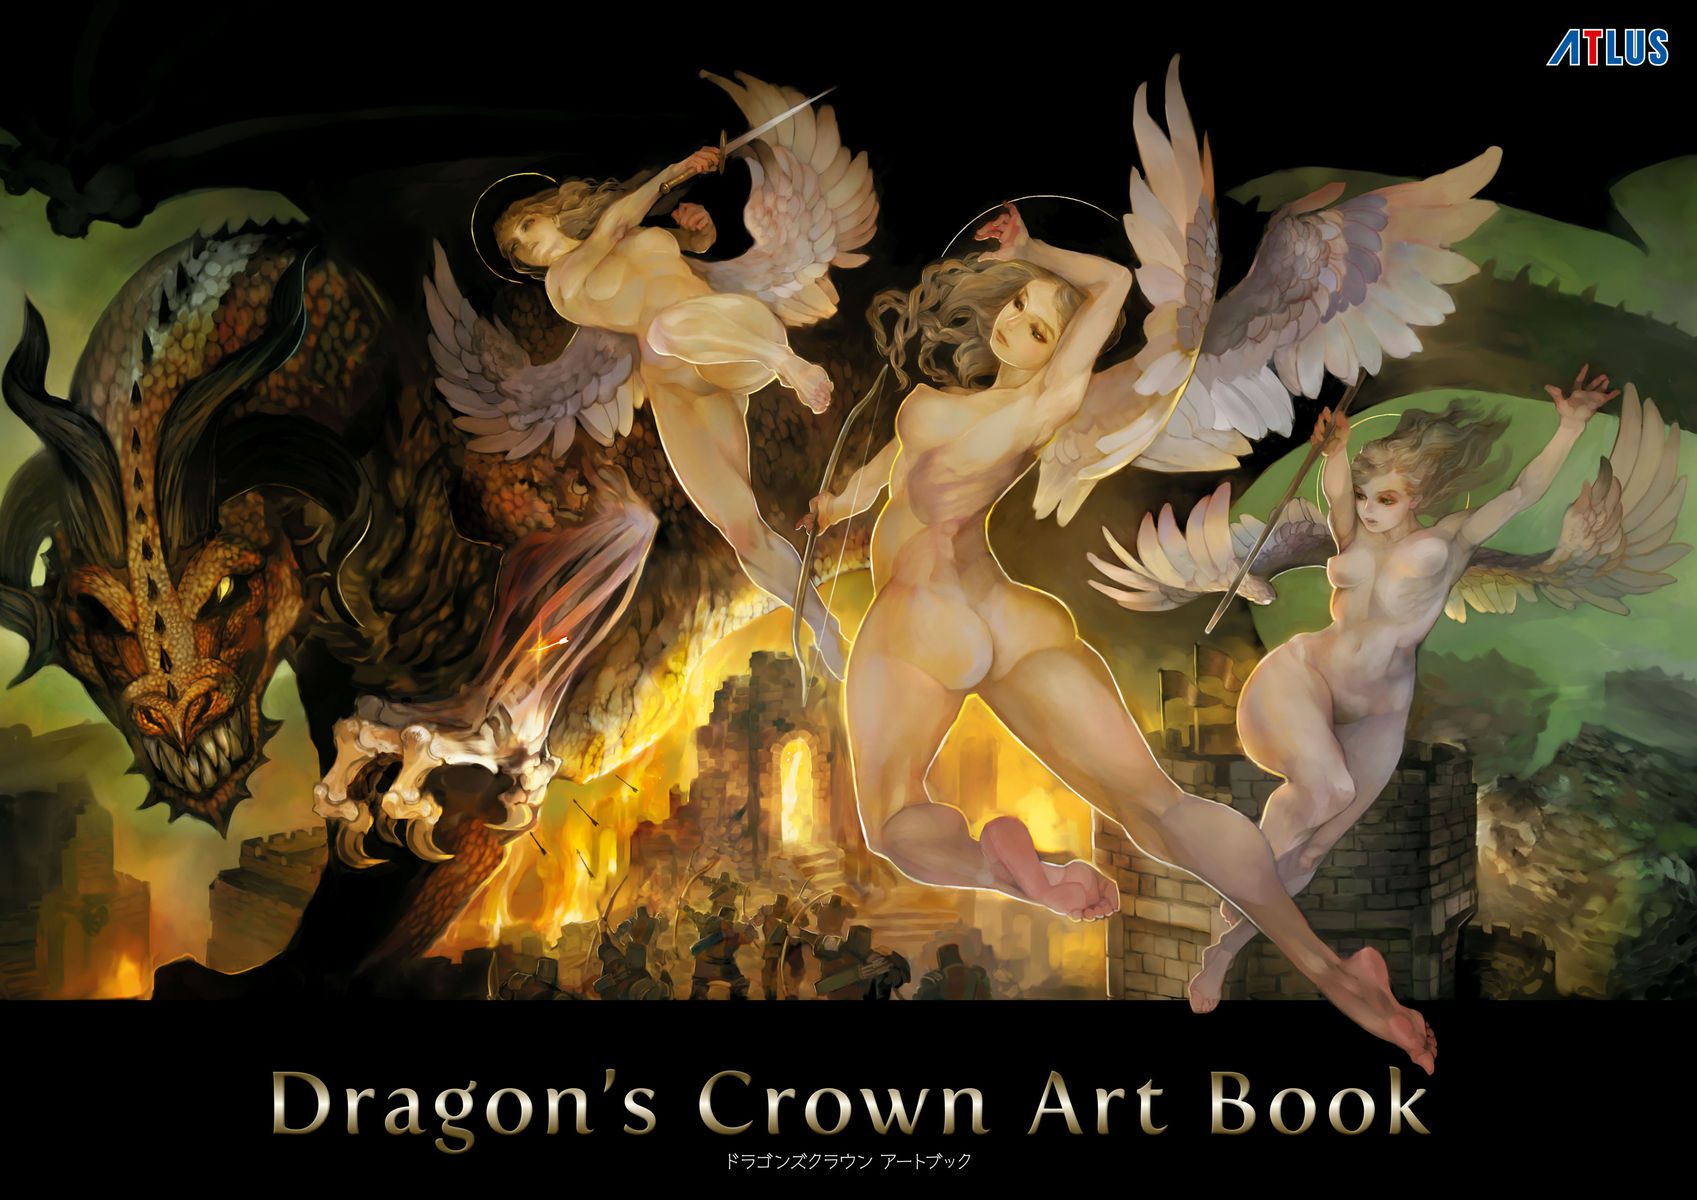 Dragons crown or Odin sphere or vanilla ware game Pierrot cute 23